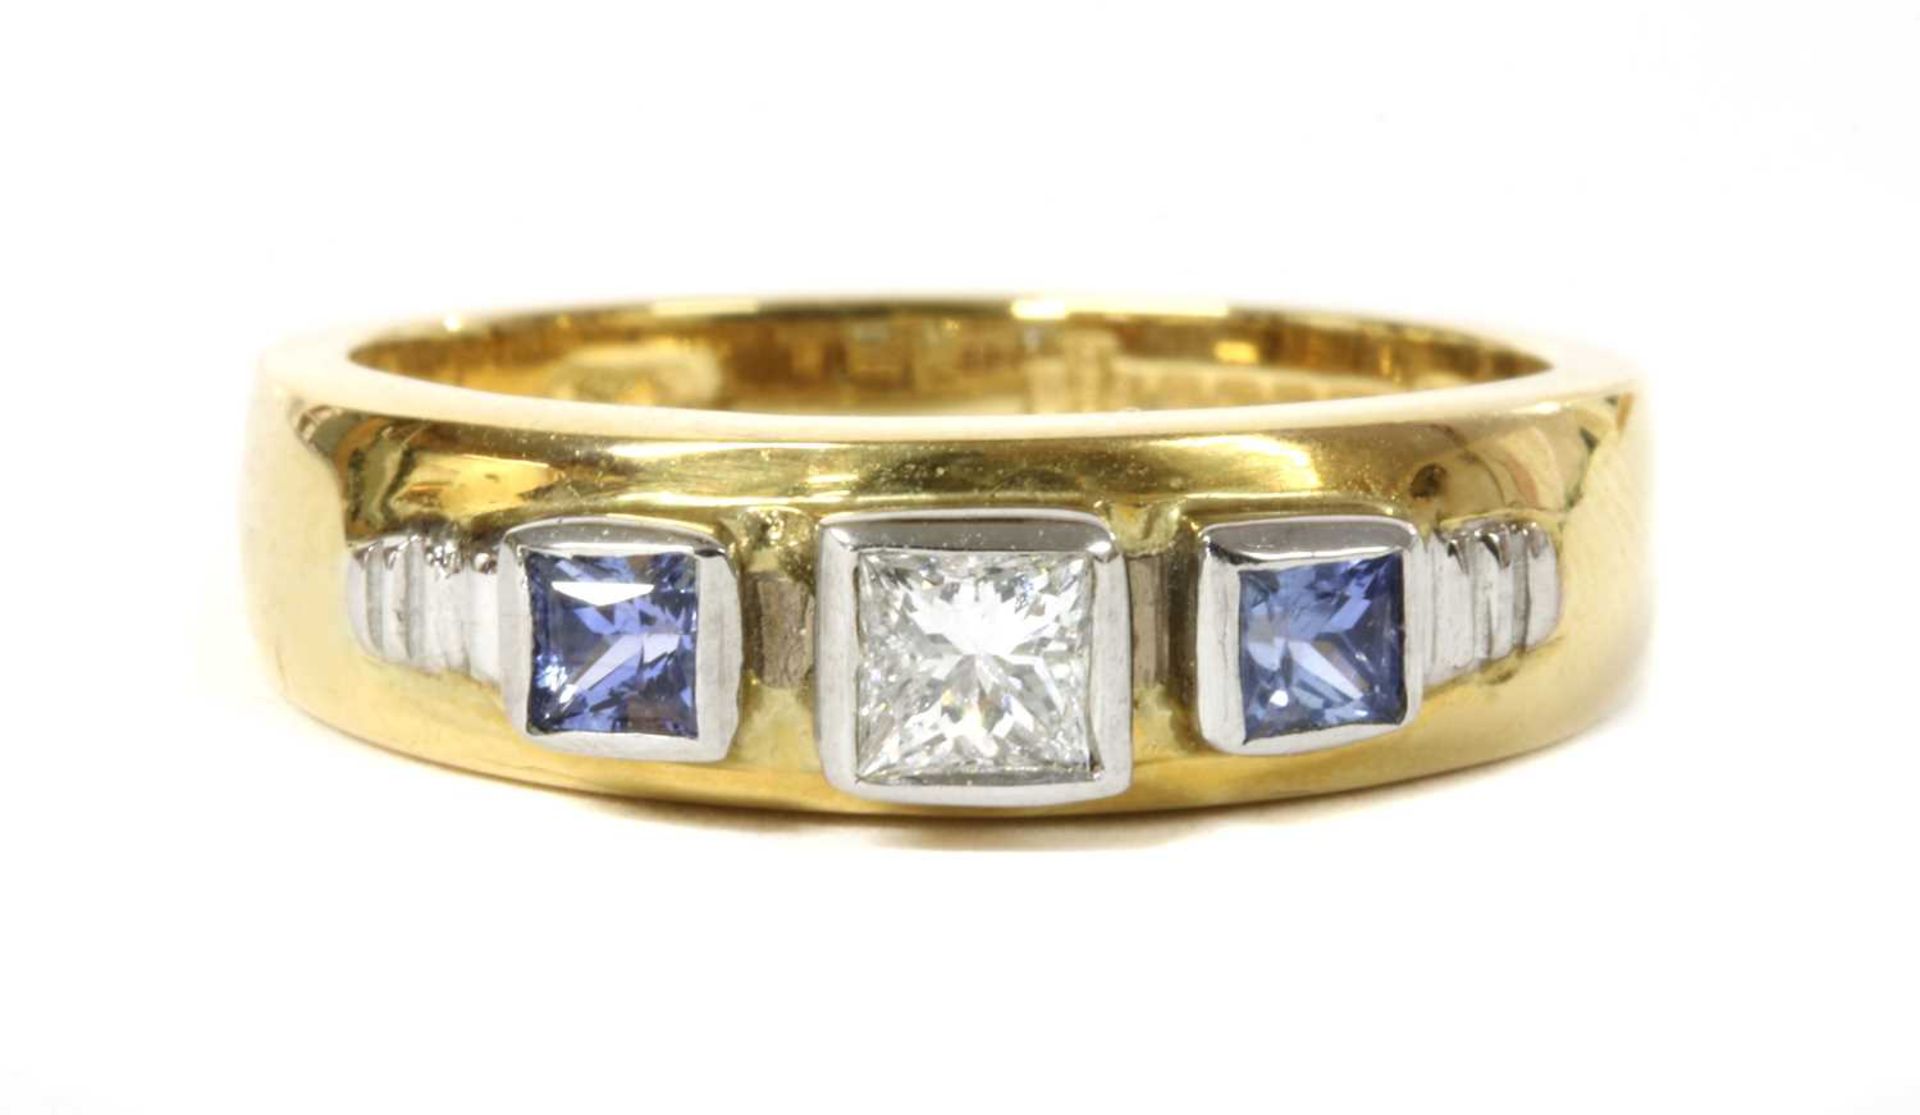 An 18ct gold diamond and tanzanite ring, by Clogau,